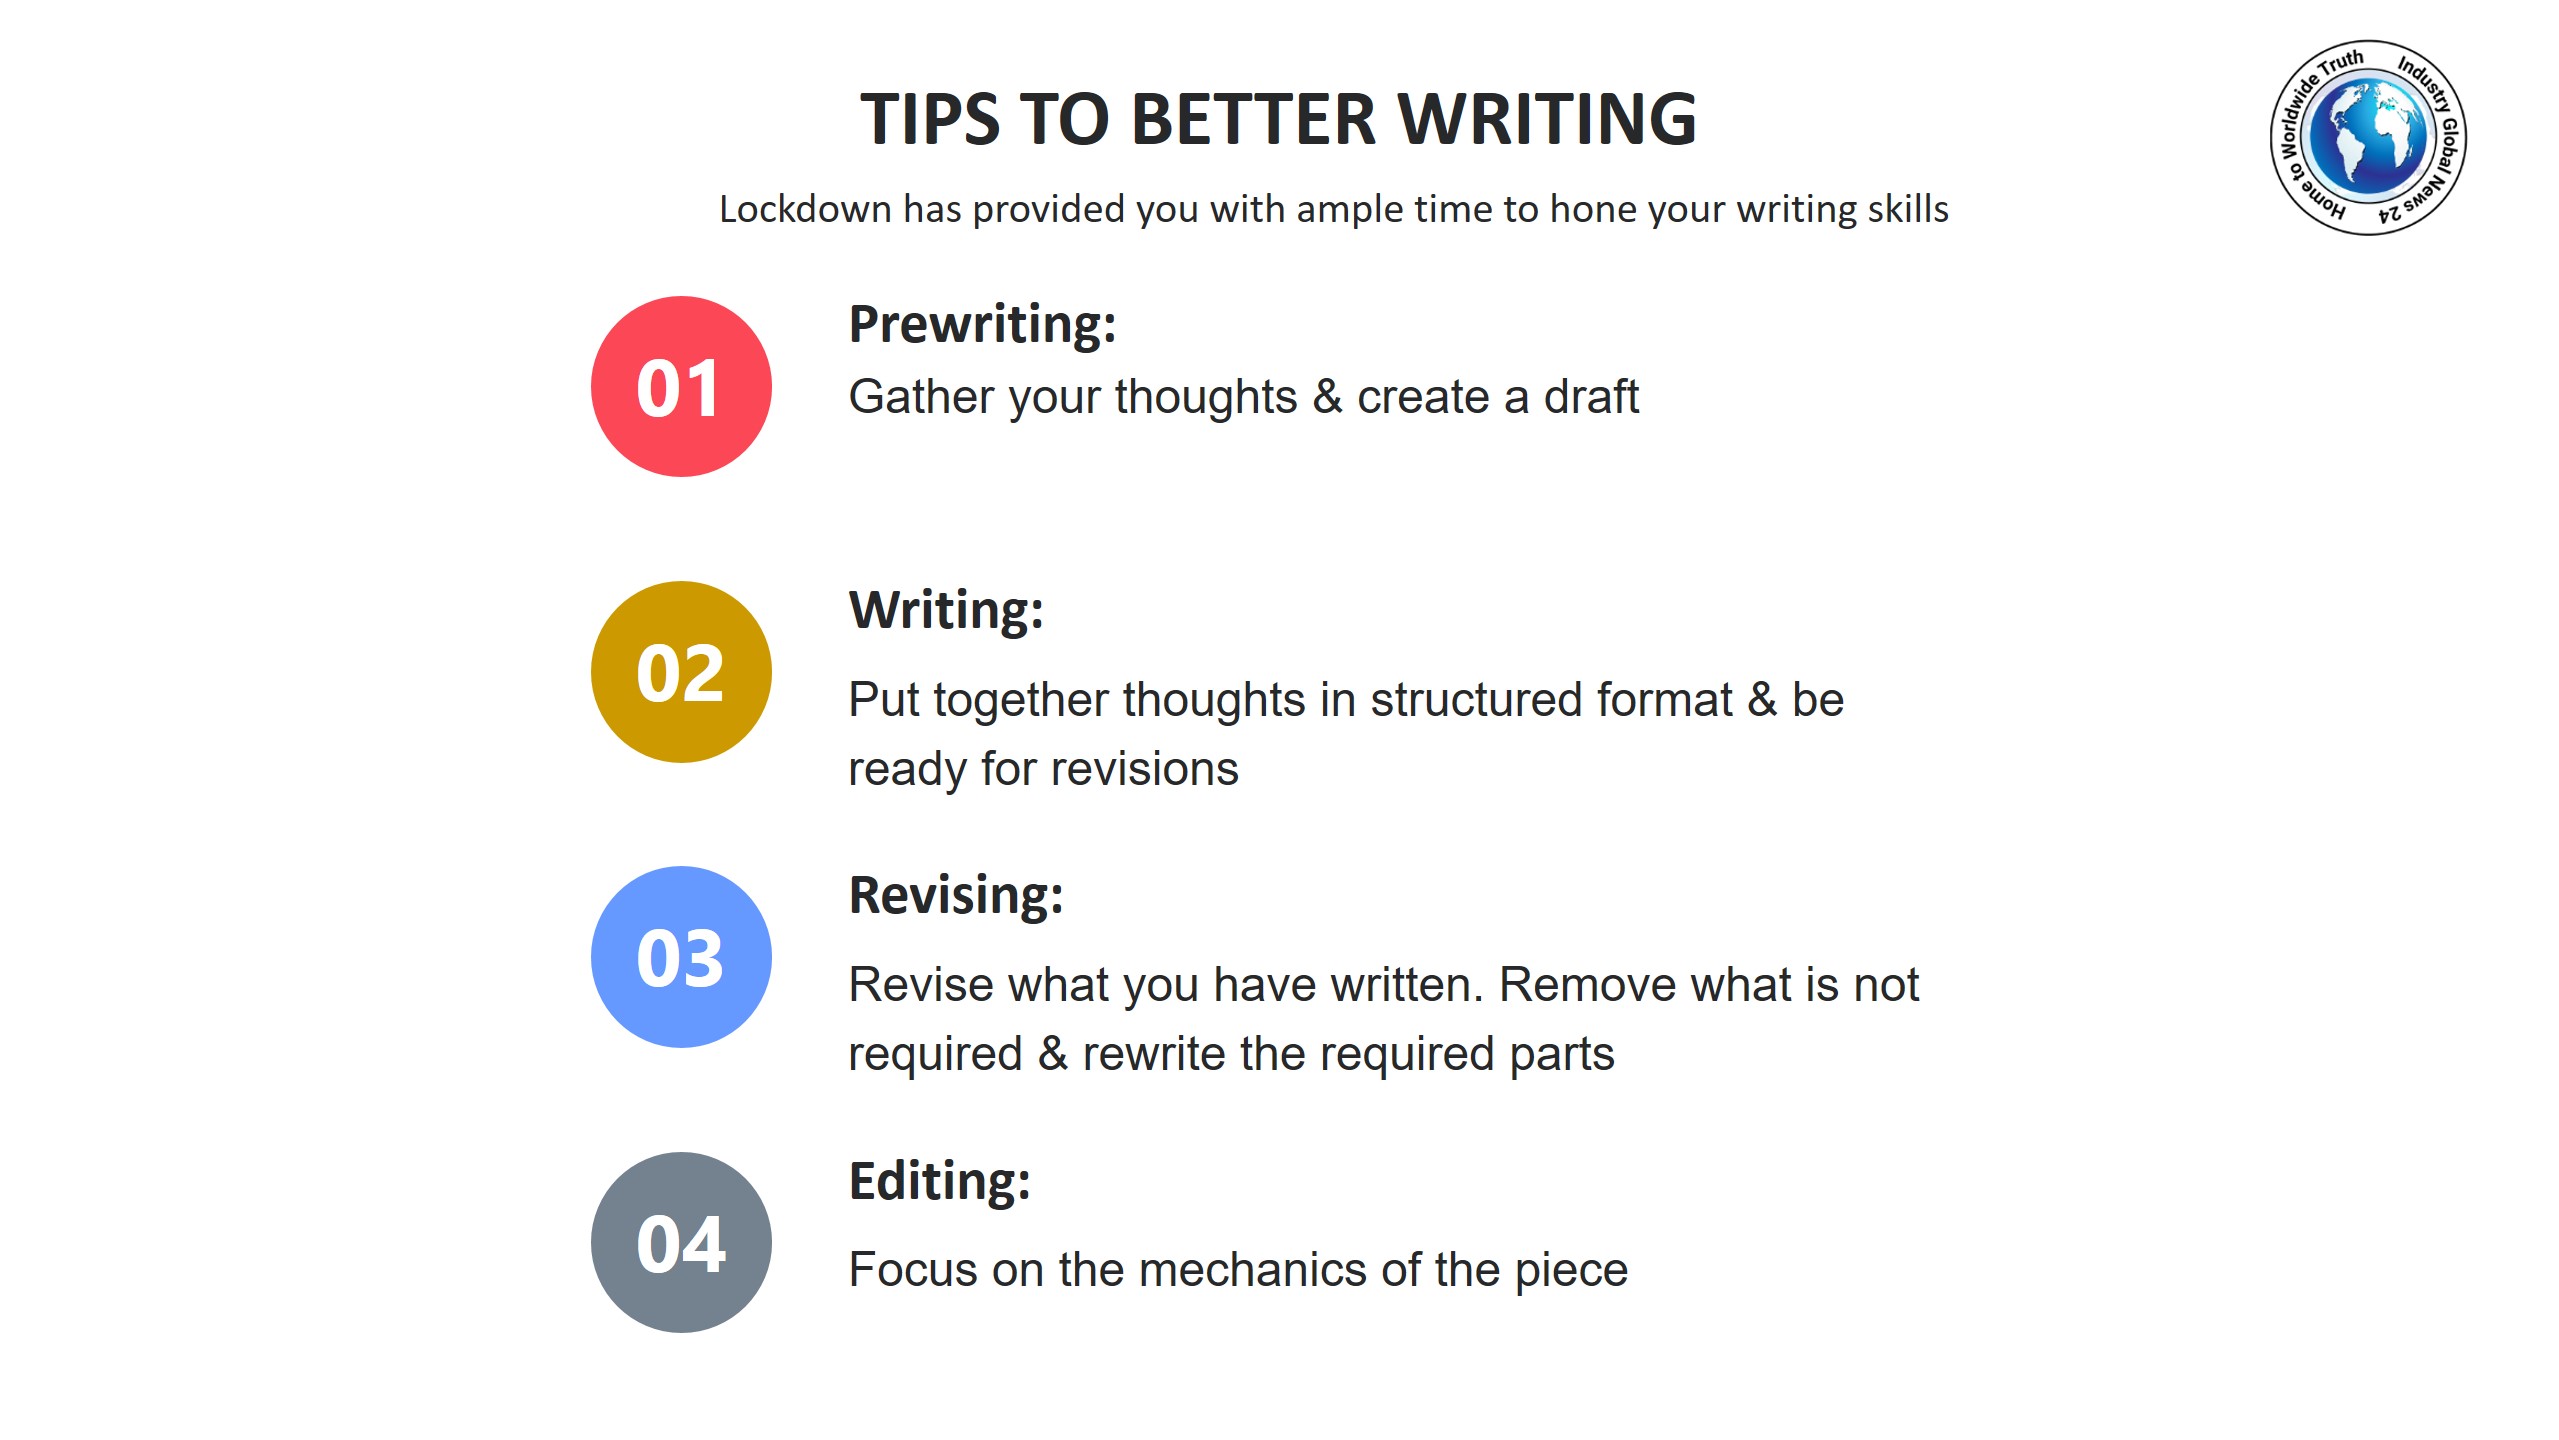 Tips to better writing